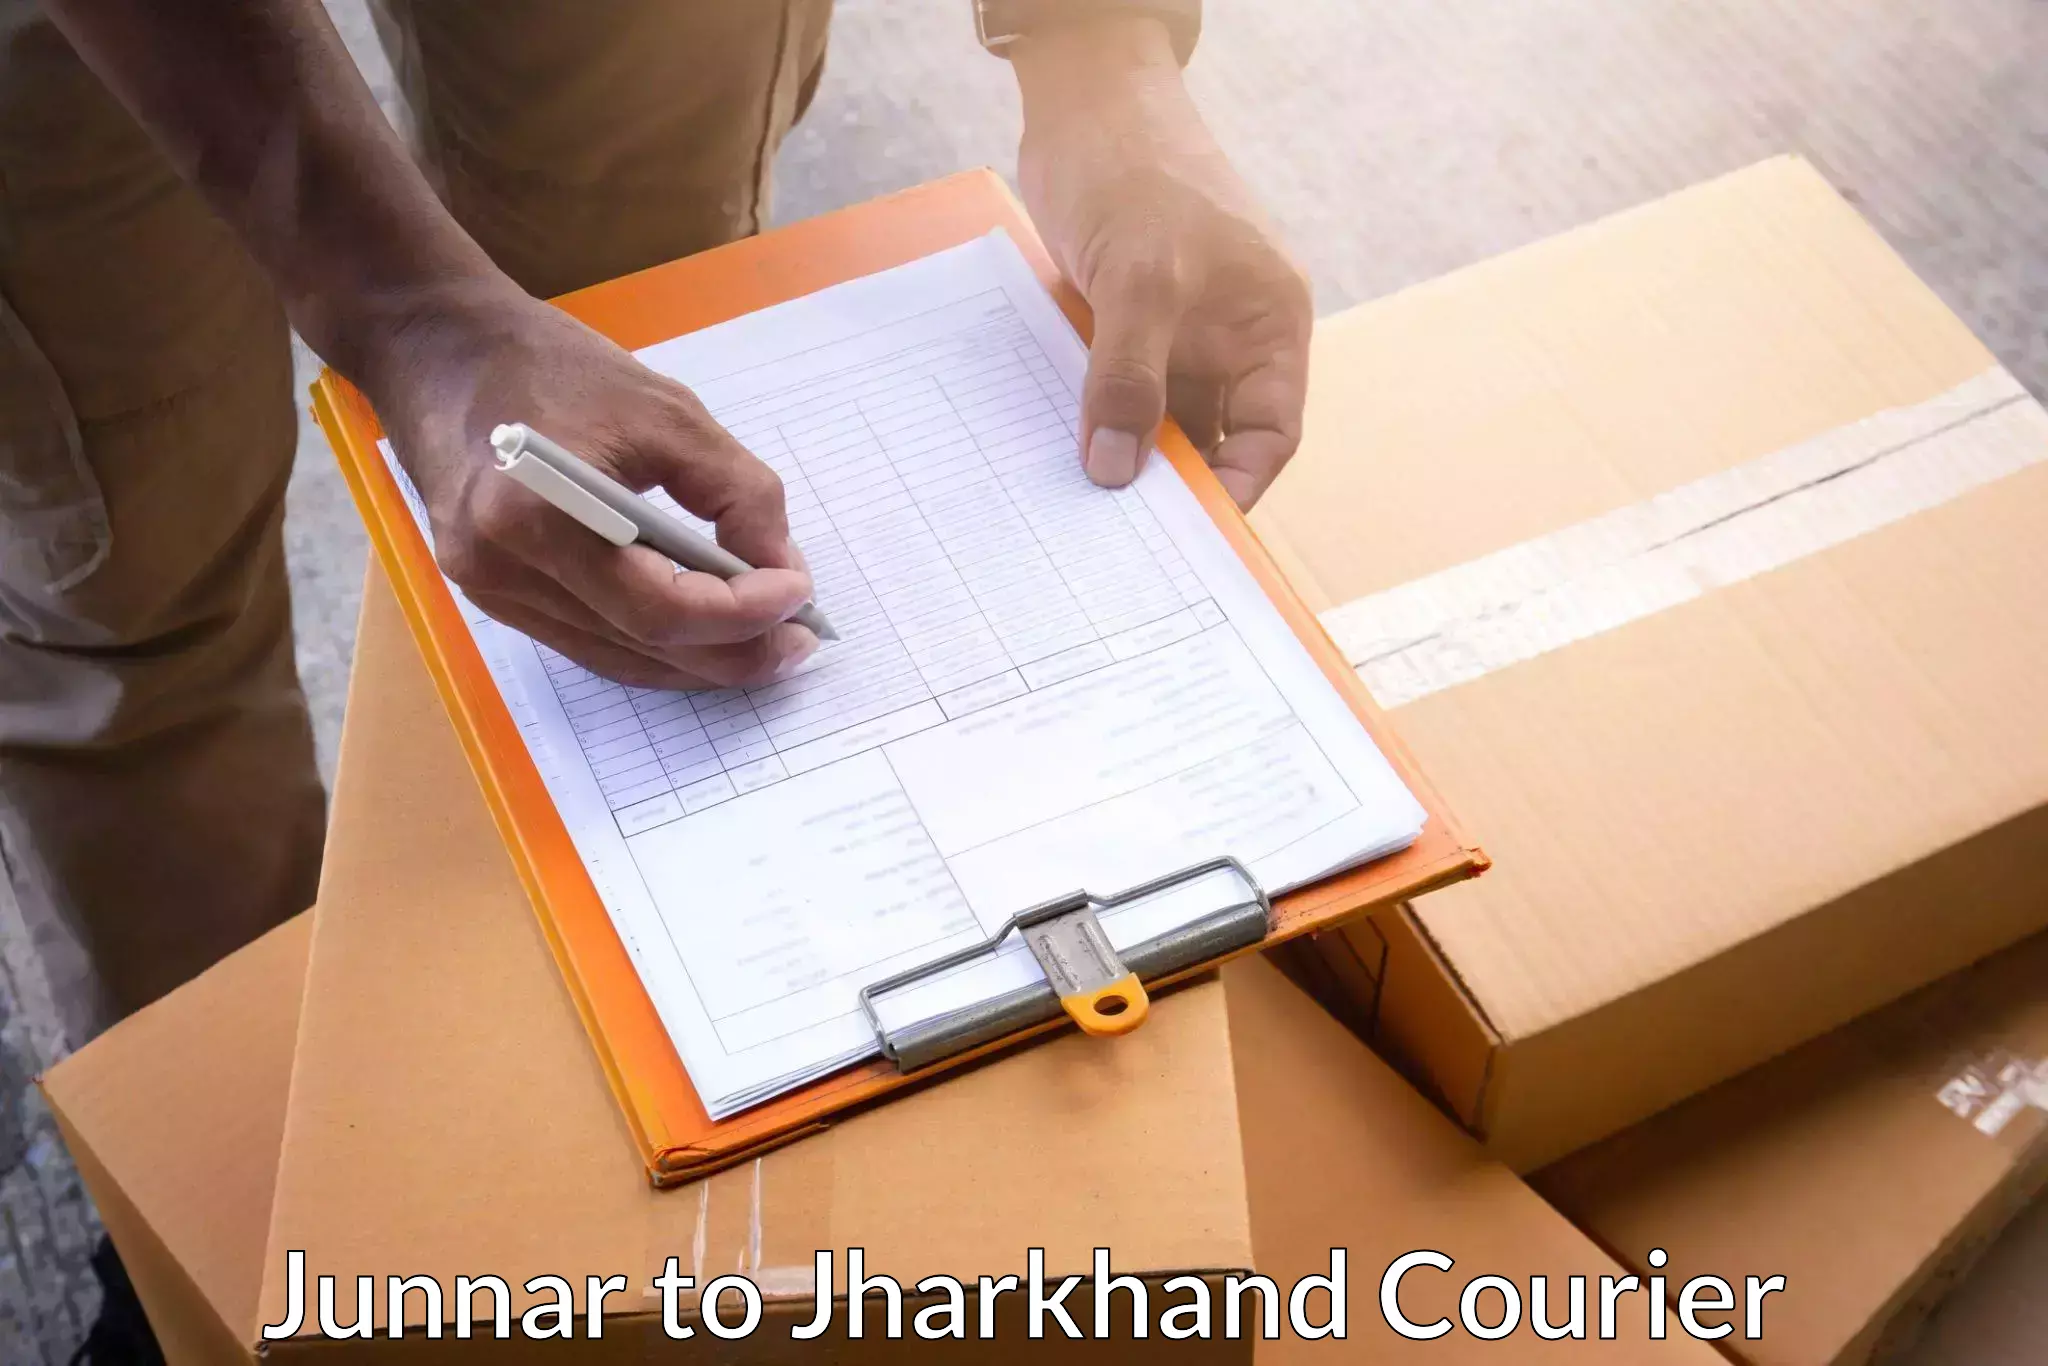 State-of-the-art courier technology Junnar to Latehar